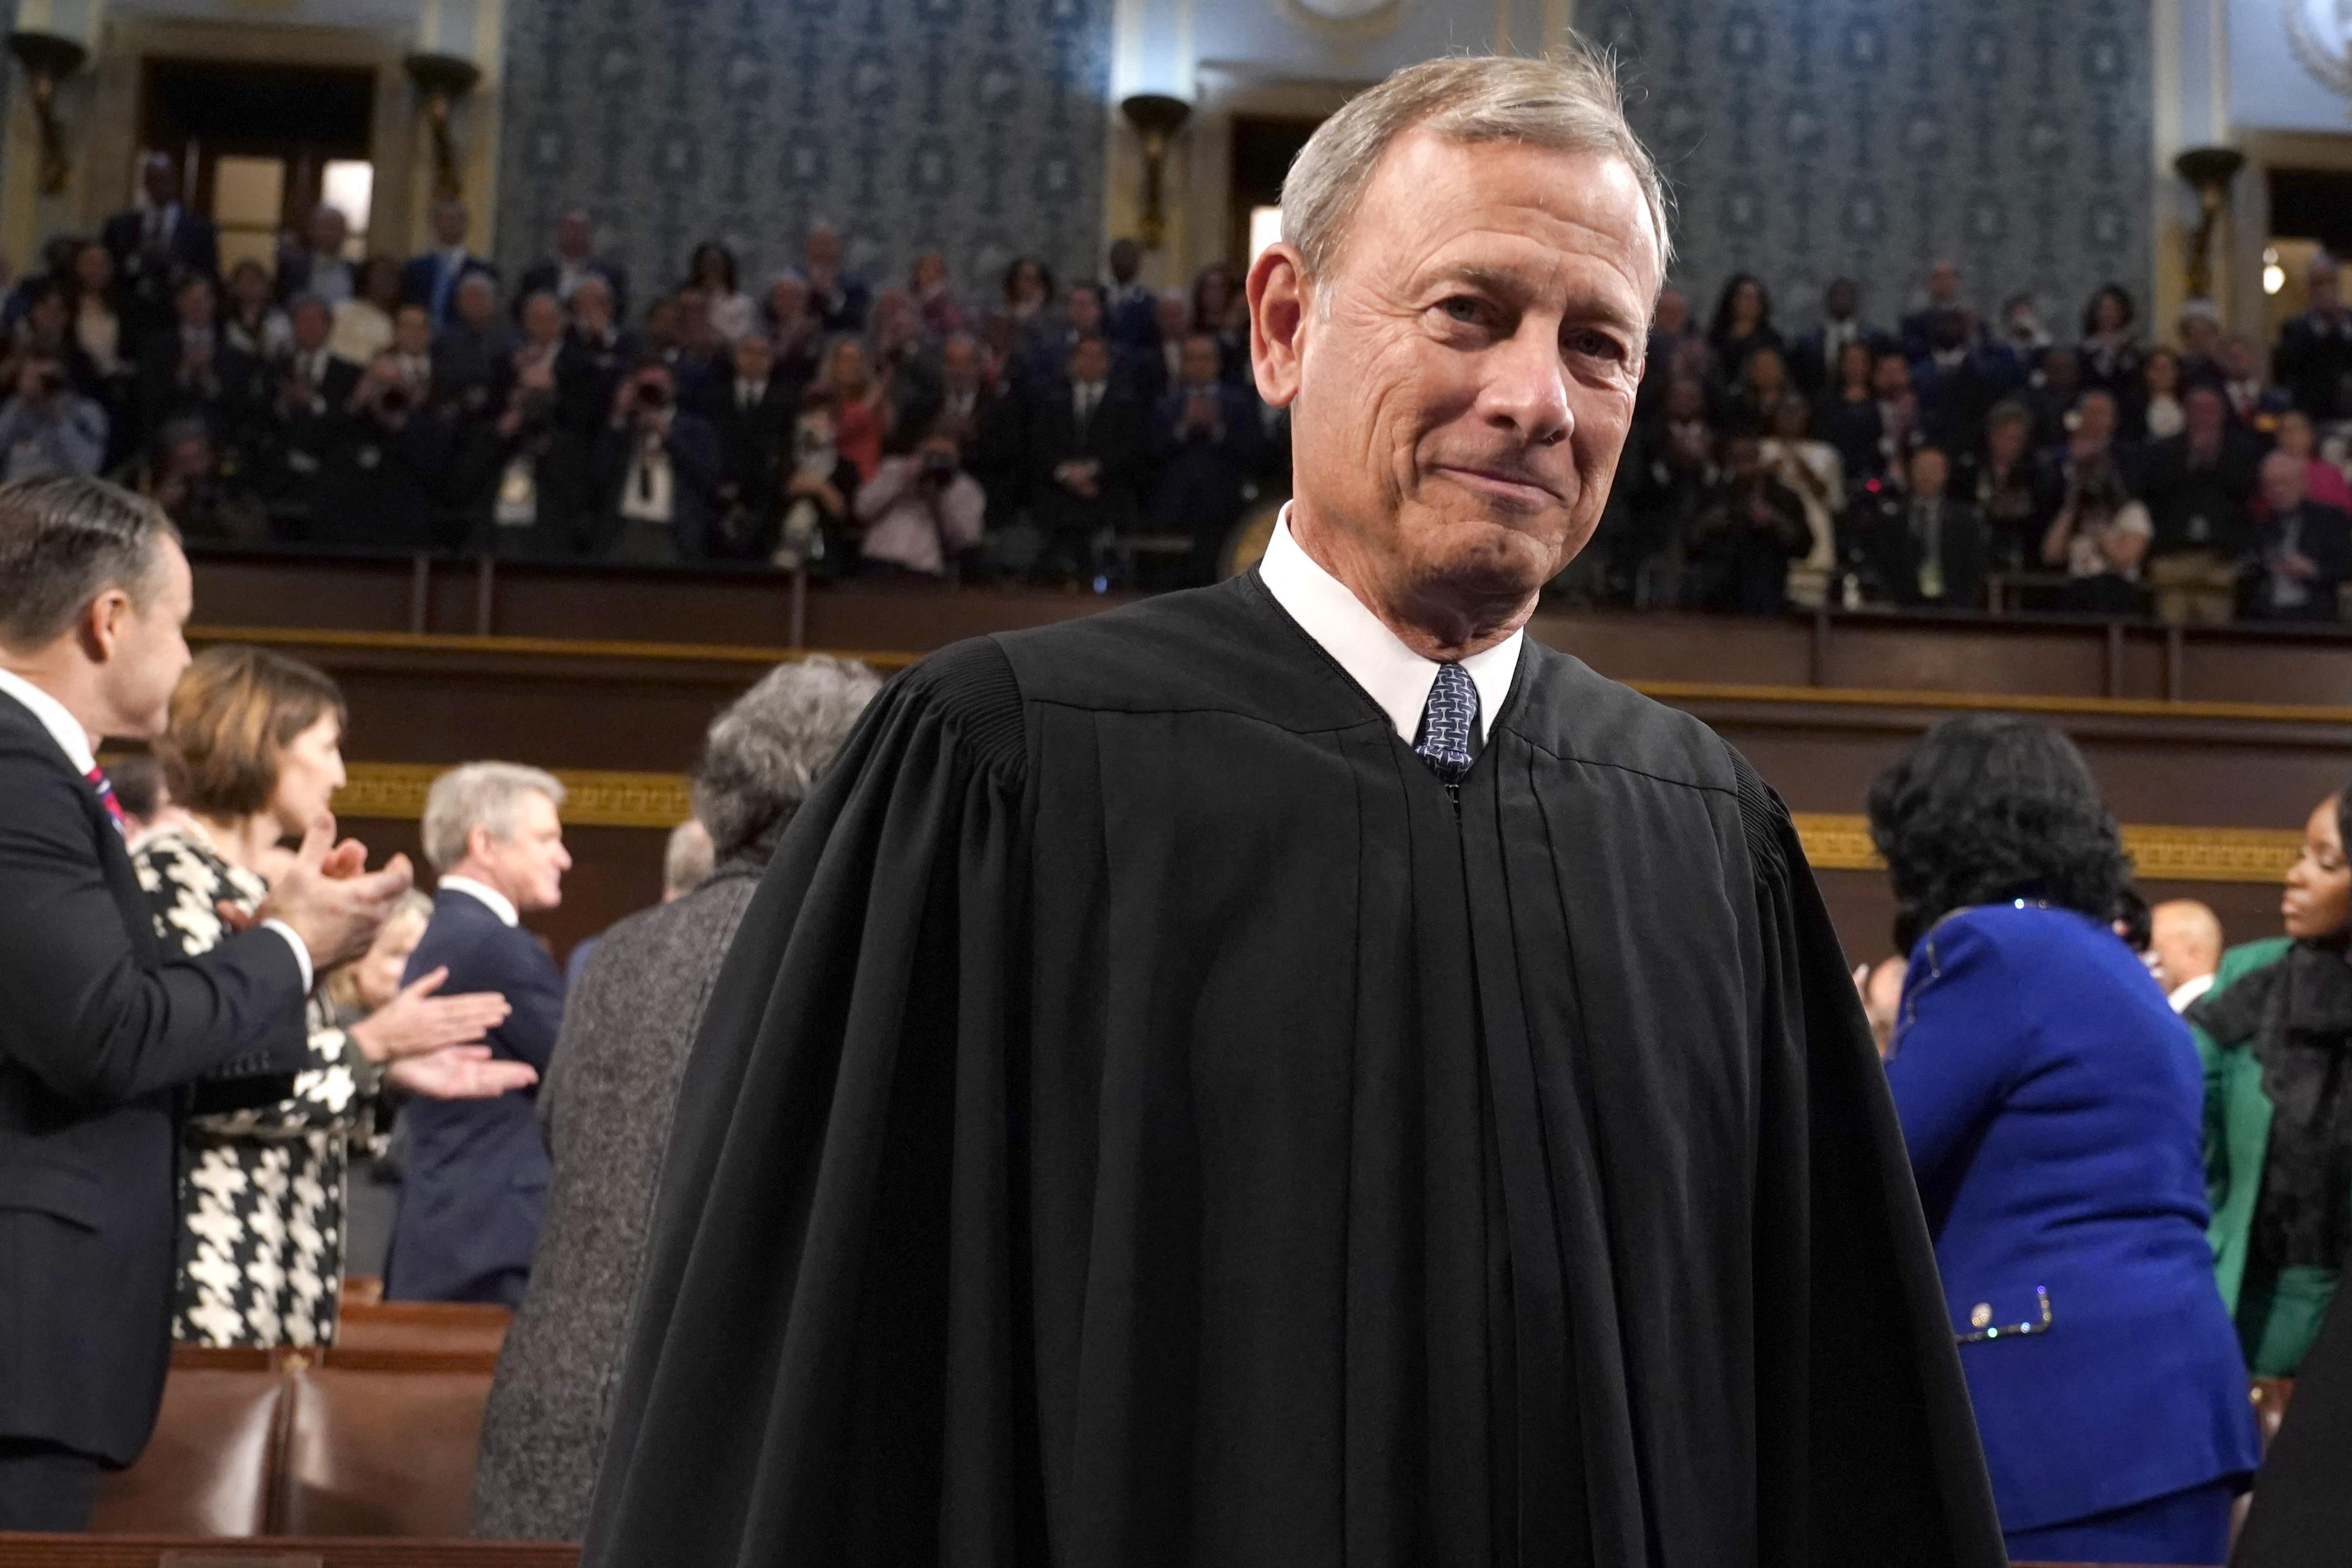 Roberts in his robe at the State of the Union address.